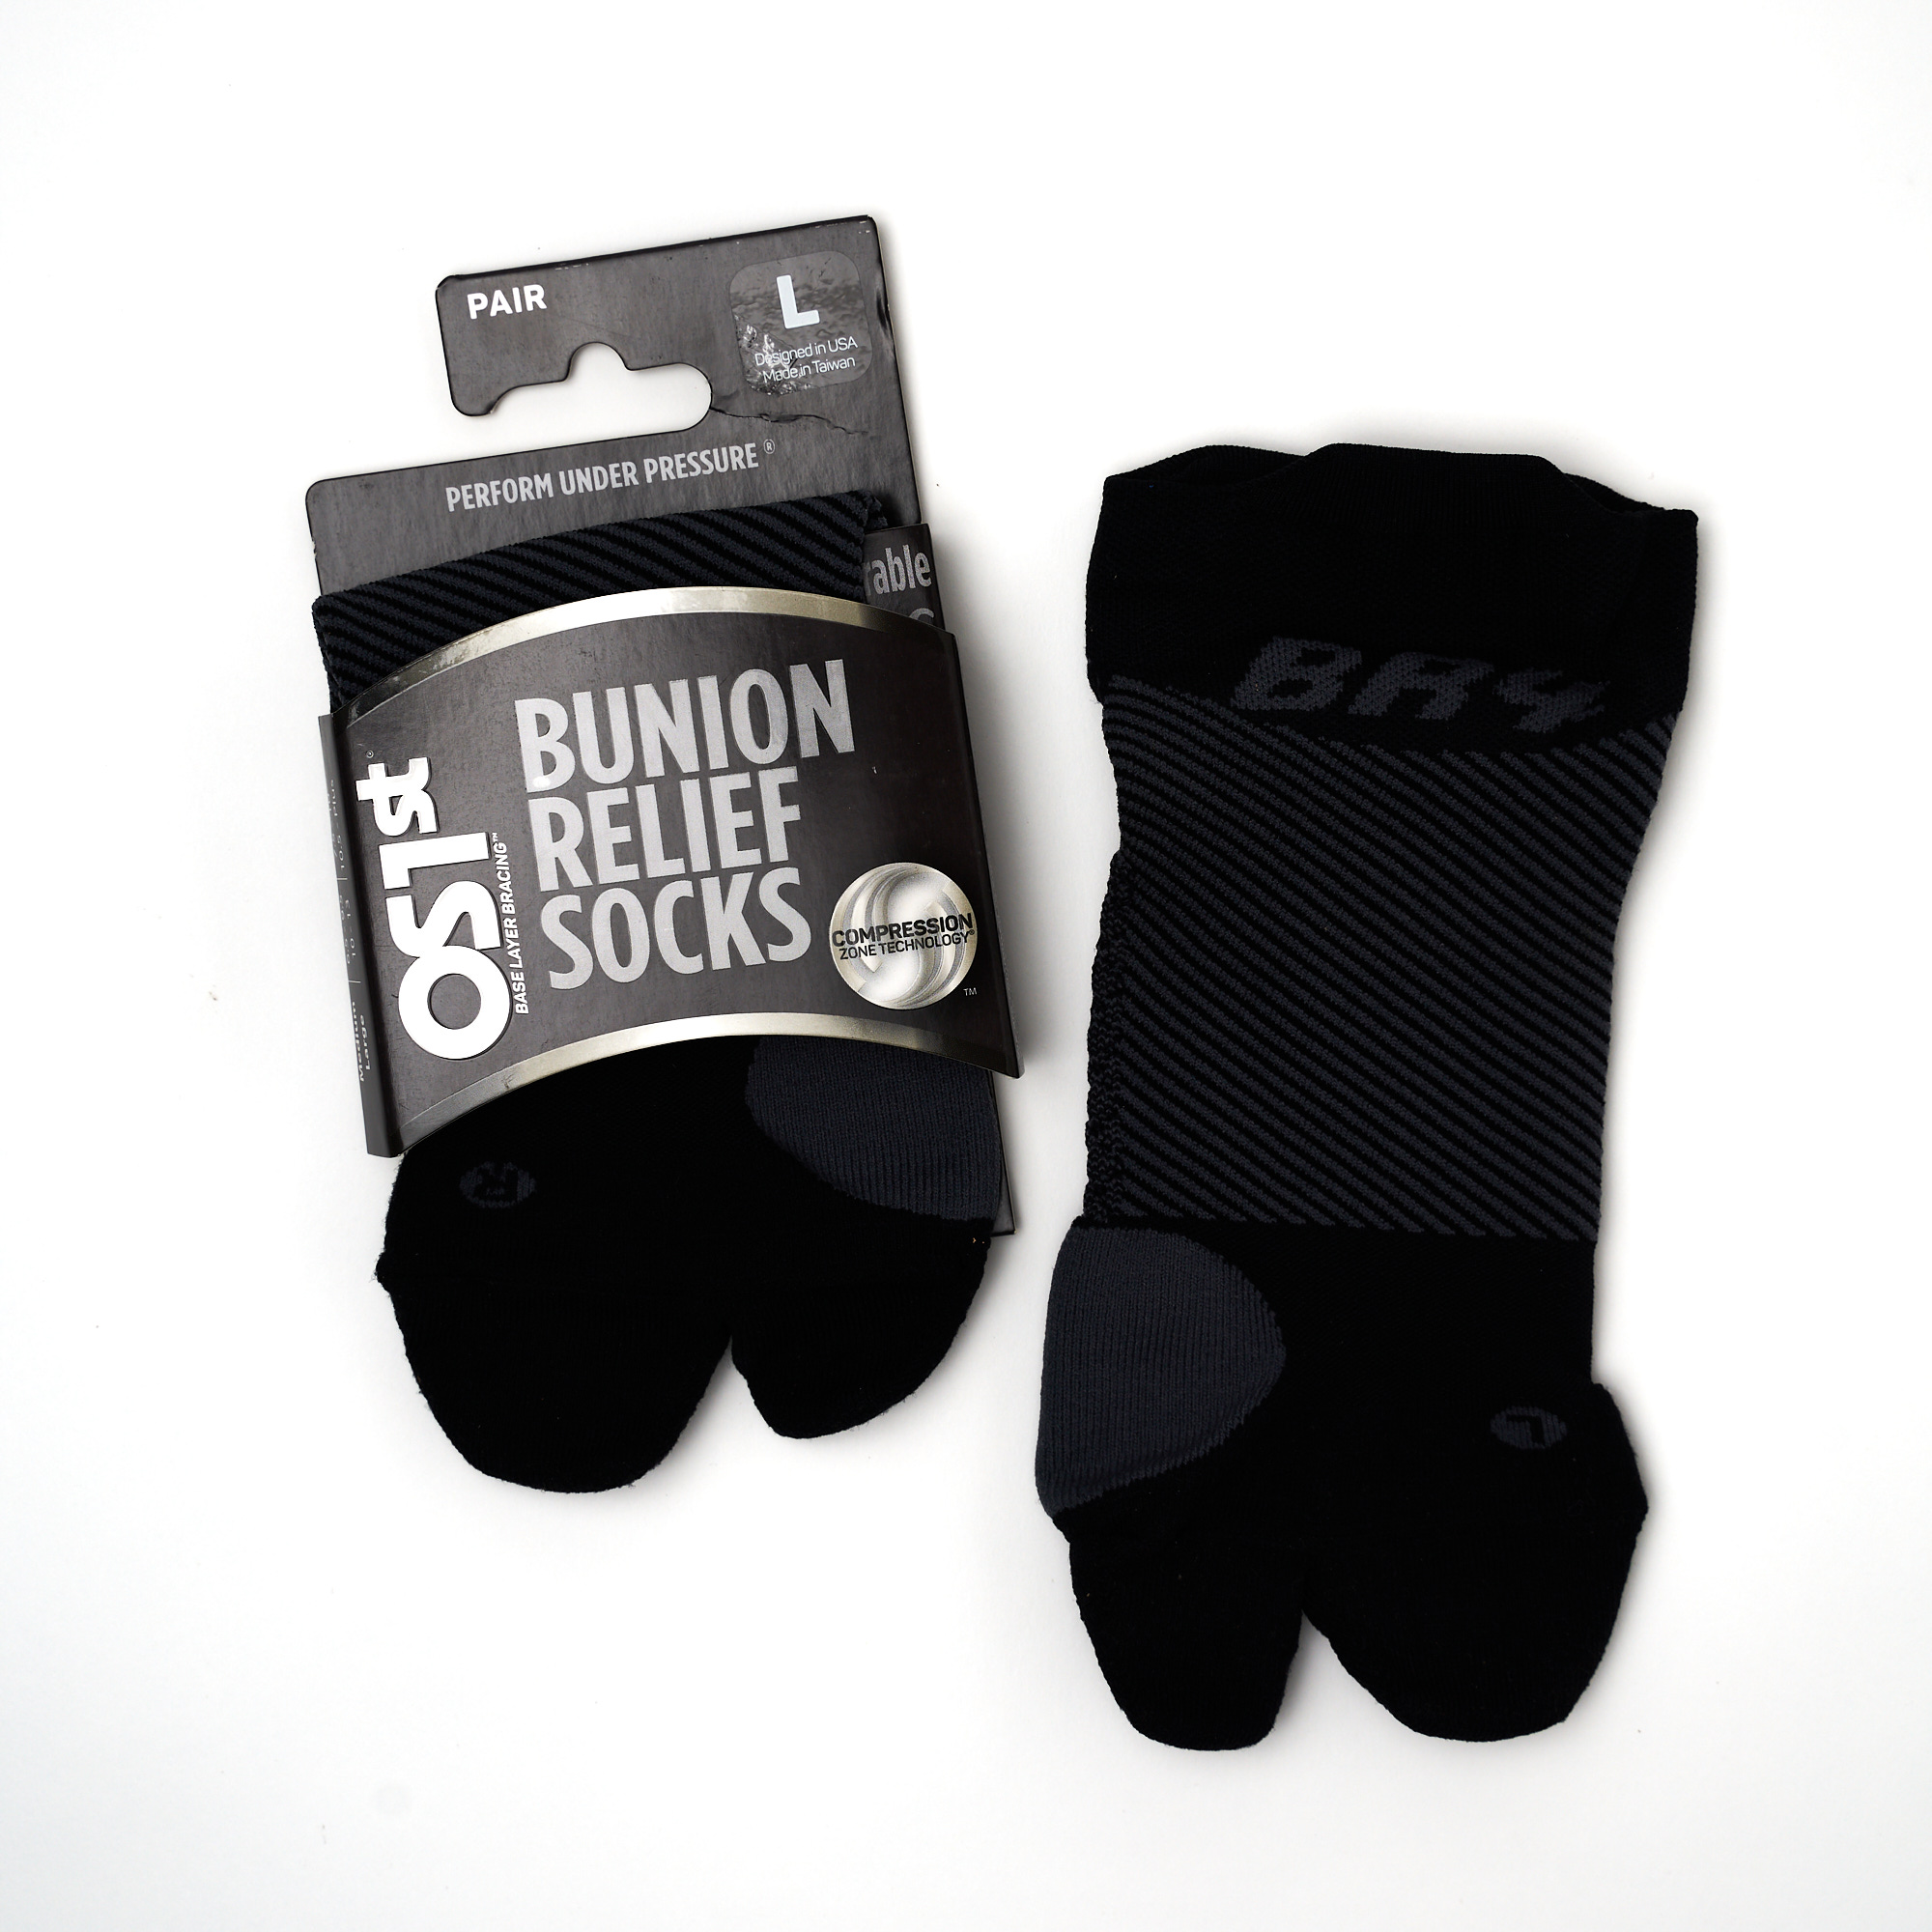 Orthosleeve bunion relief socks BR4 | Physio And More